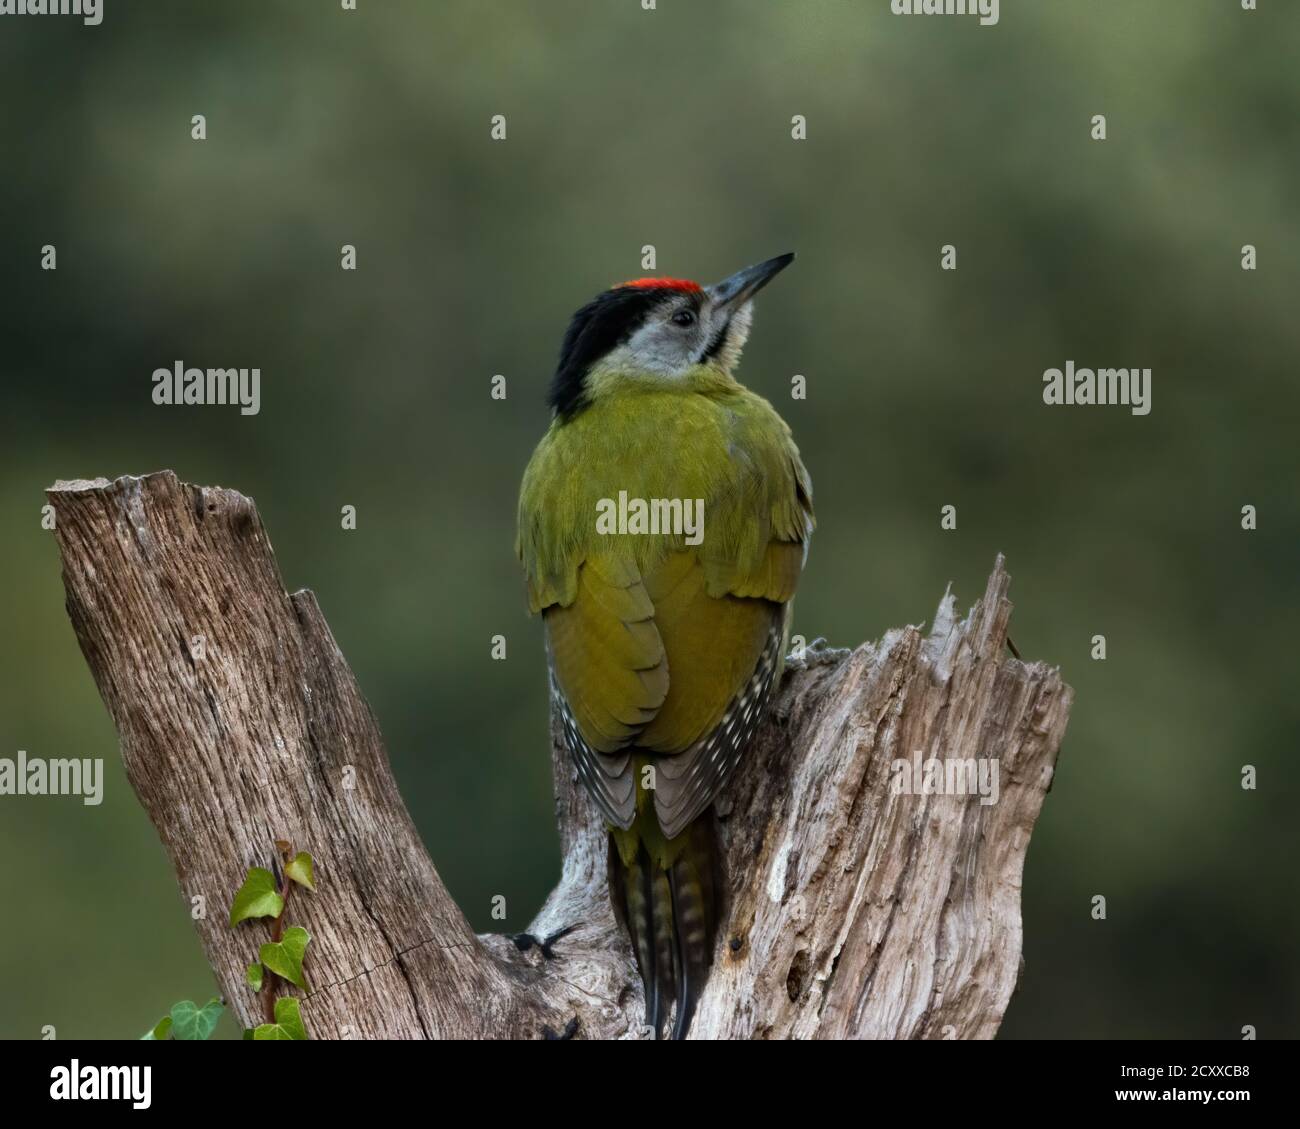 A Grey-headed Woodpecker (Picus canus), perched on a tree log with its back facing, in the forests of Sattal in Uttarakhand, India. Stock Photo